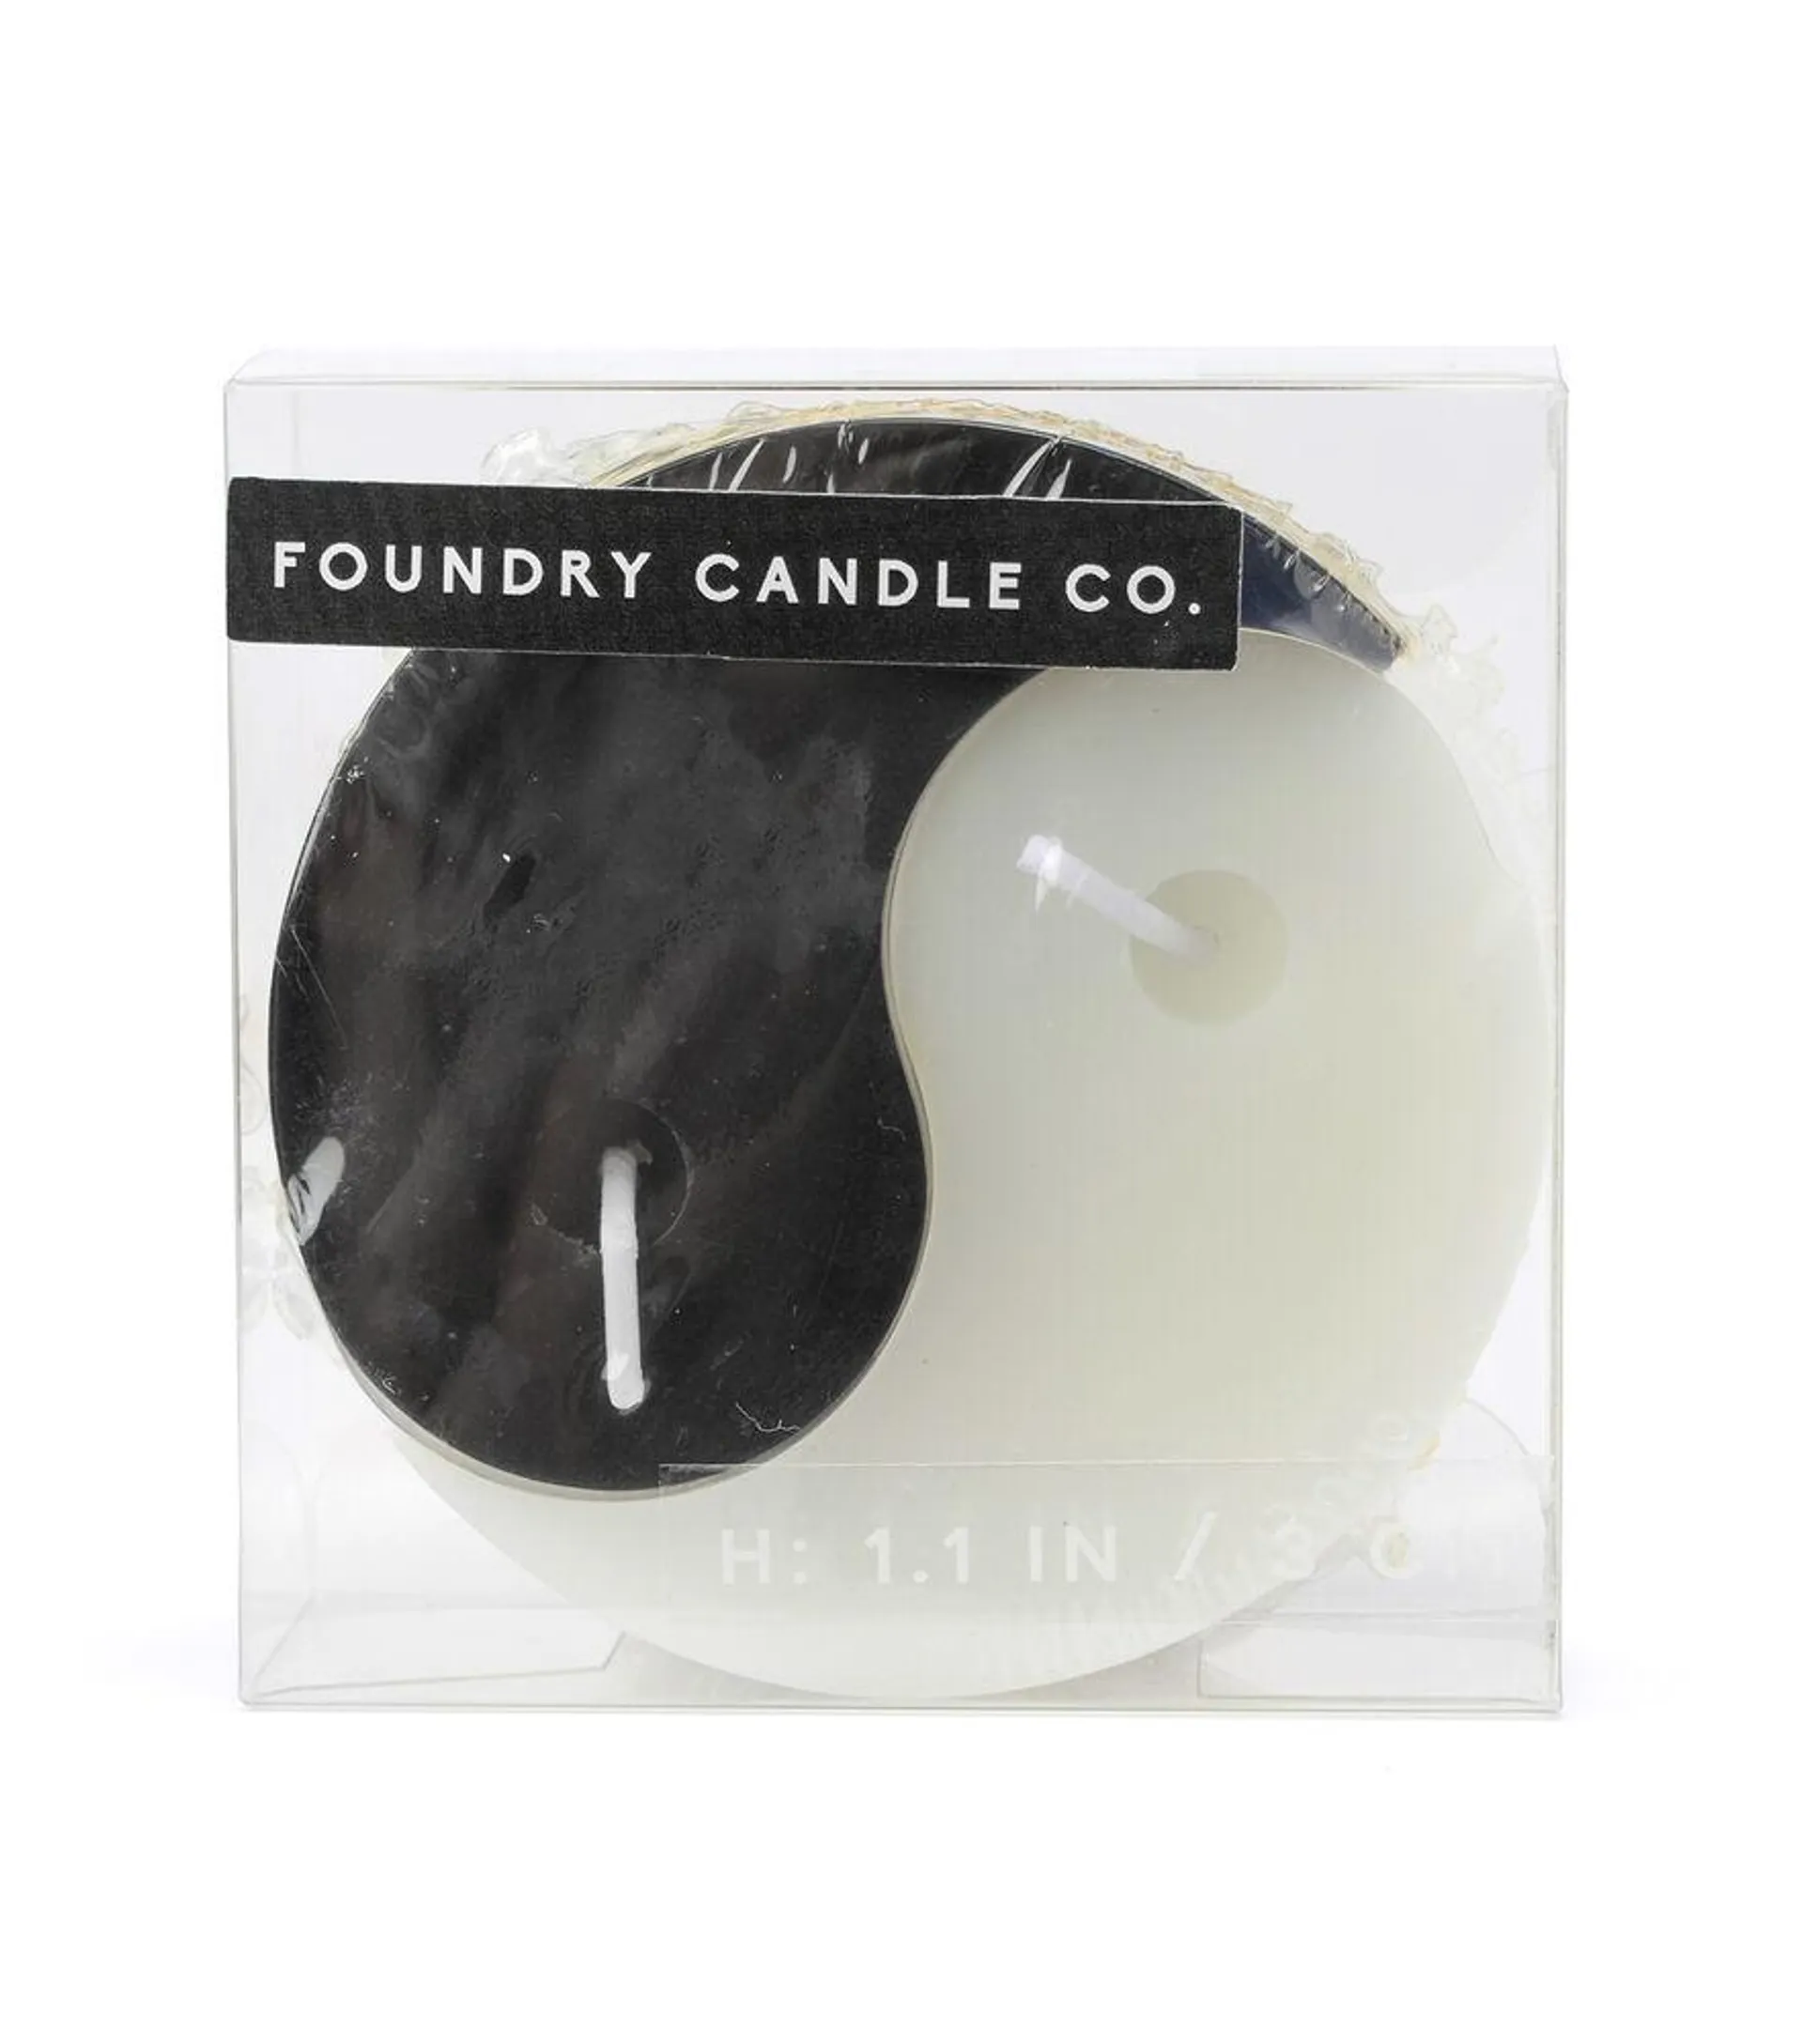 Foundry 4oz Ying Yang Scented Figural Candle